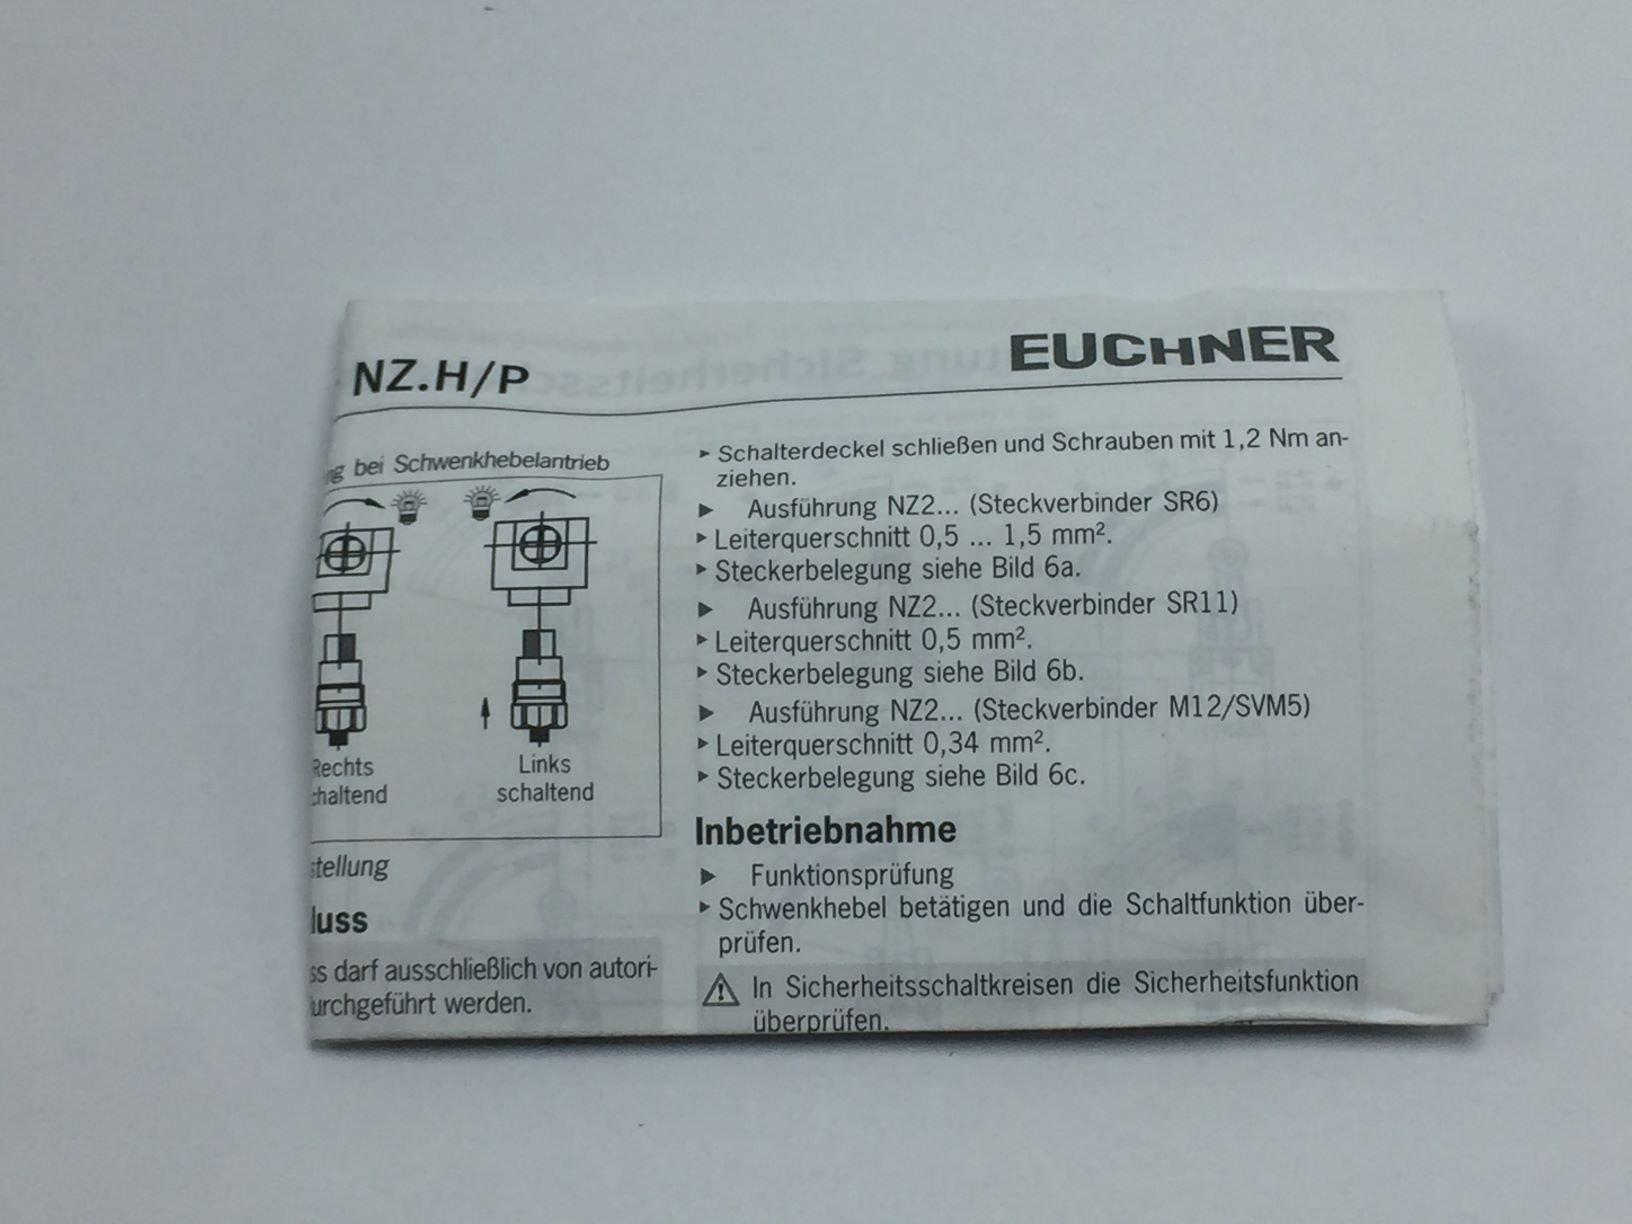 NEW EUCHNER NZ2PS-3131 SAFETY SWITCH 24VDC W/LEVER ARM & STEEL ROLLER PN# 090150